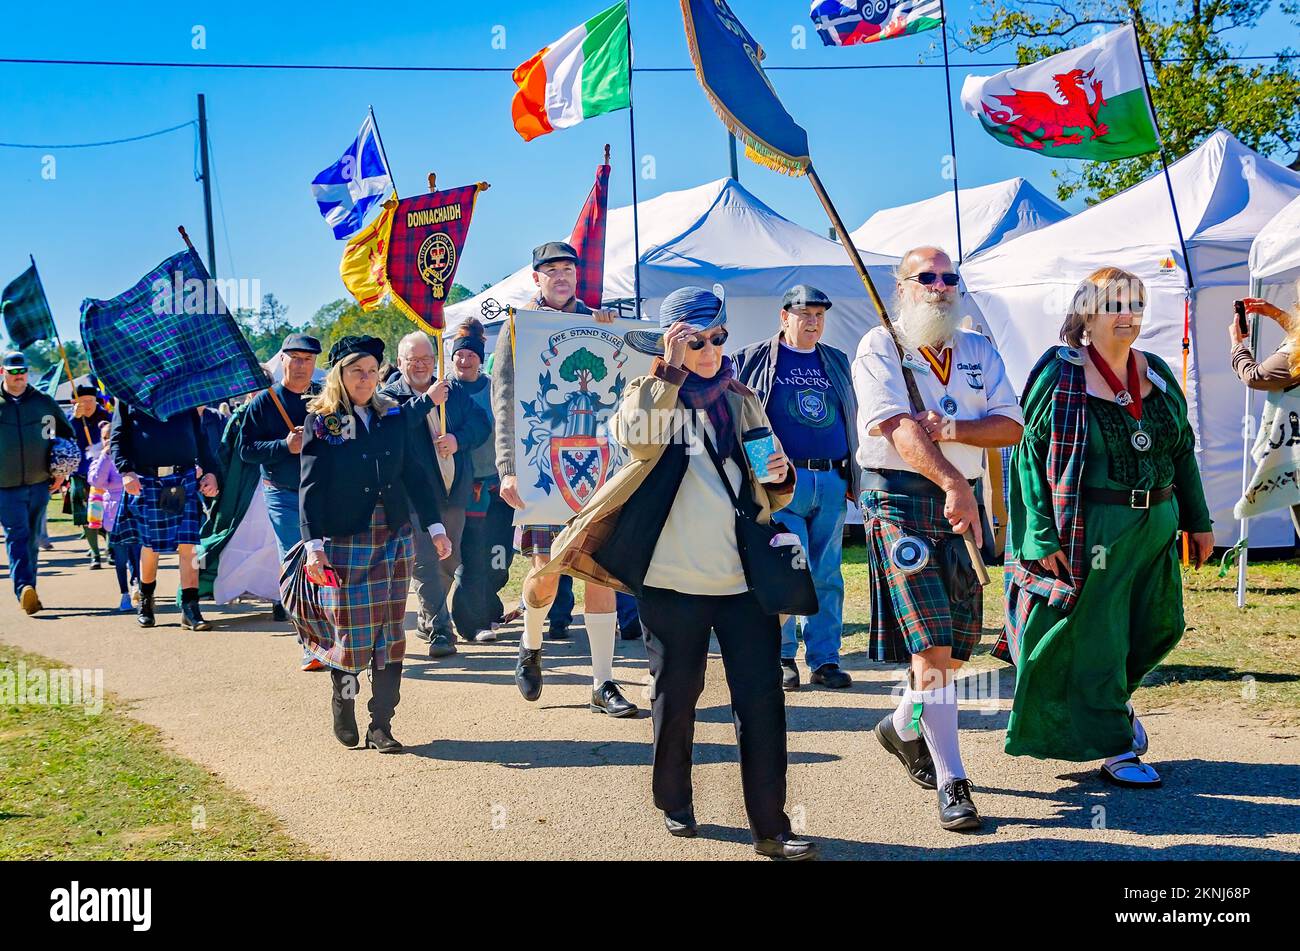 People carry tartan banners and Celtic flags during the parade of clan tartans at the Scottish Highland Games in Gulfport, Mississippi. Stock Photo